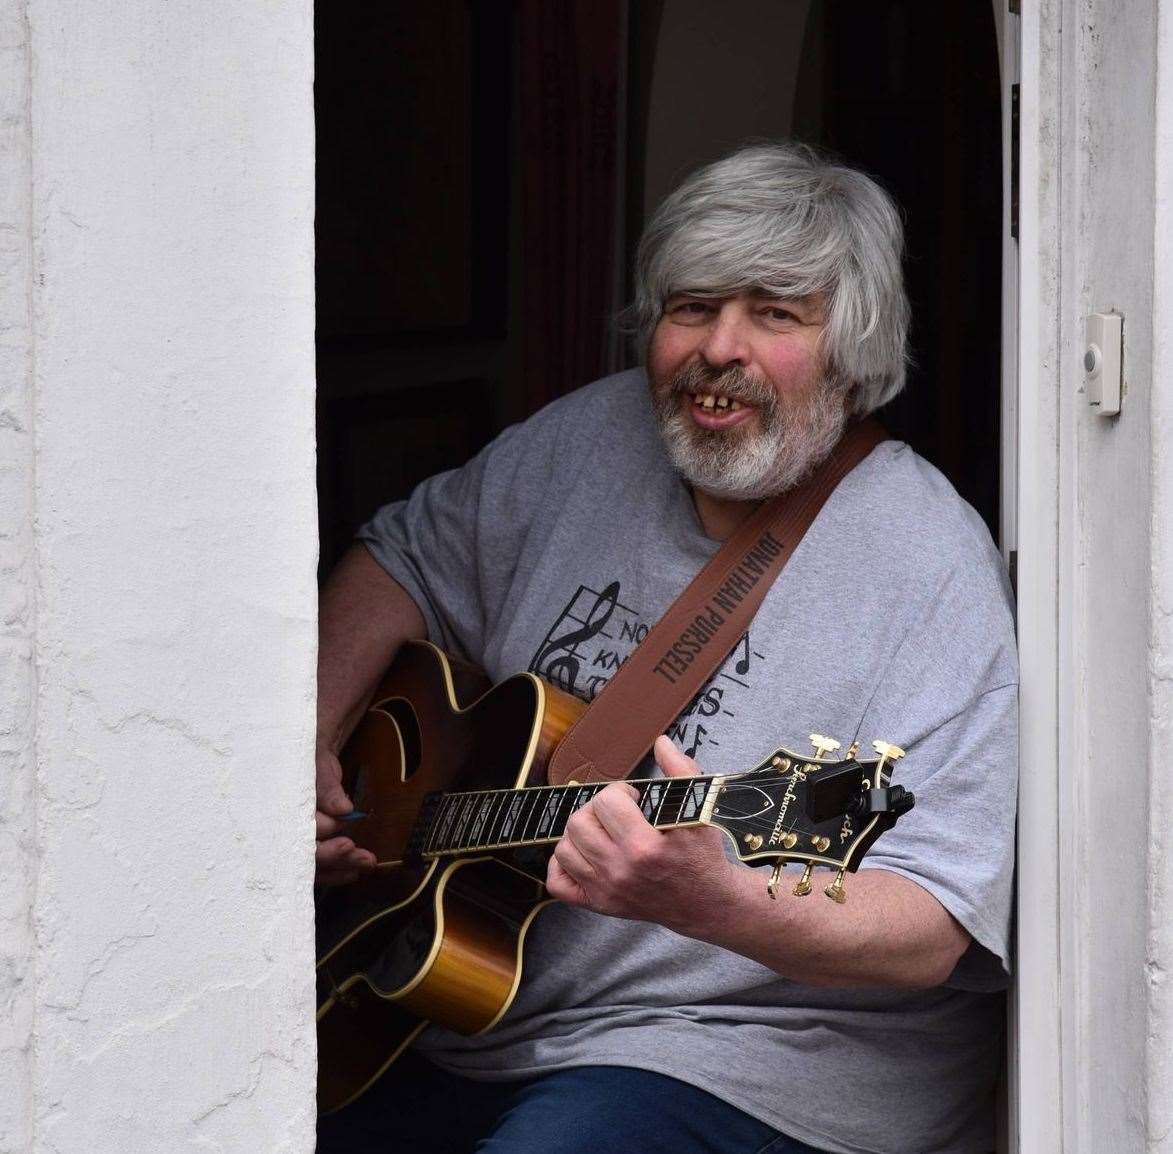 Jonathan Purssell has been playing his guitar and singing in his doorway since May 2020 Picture: Graham Keerin at Natural Images